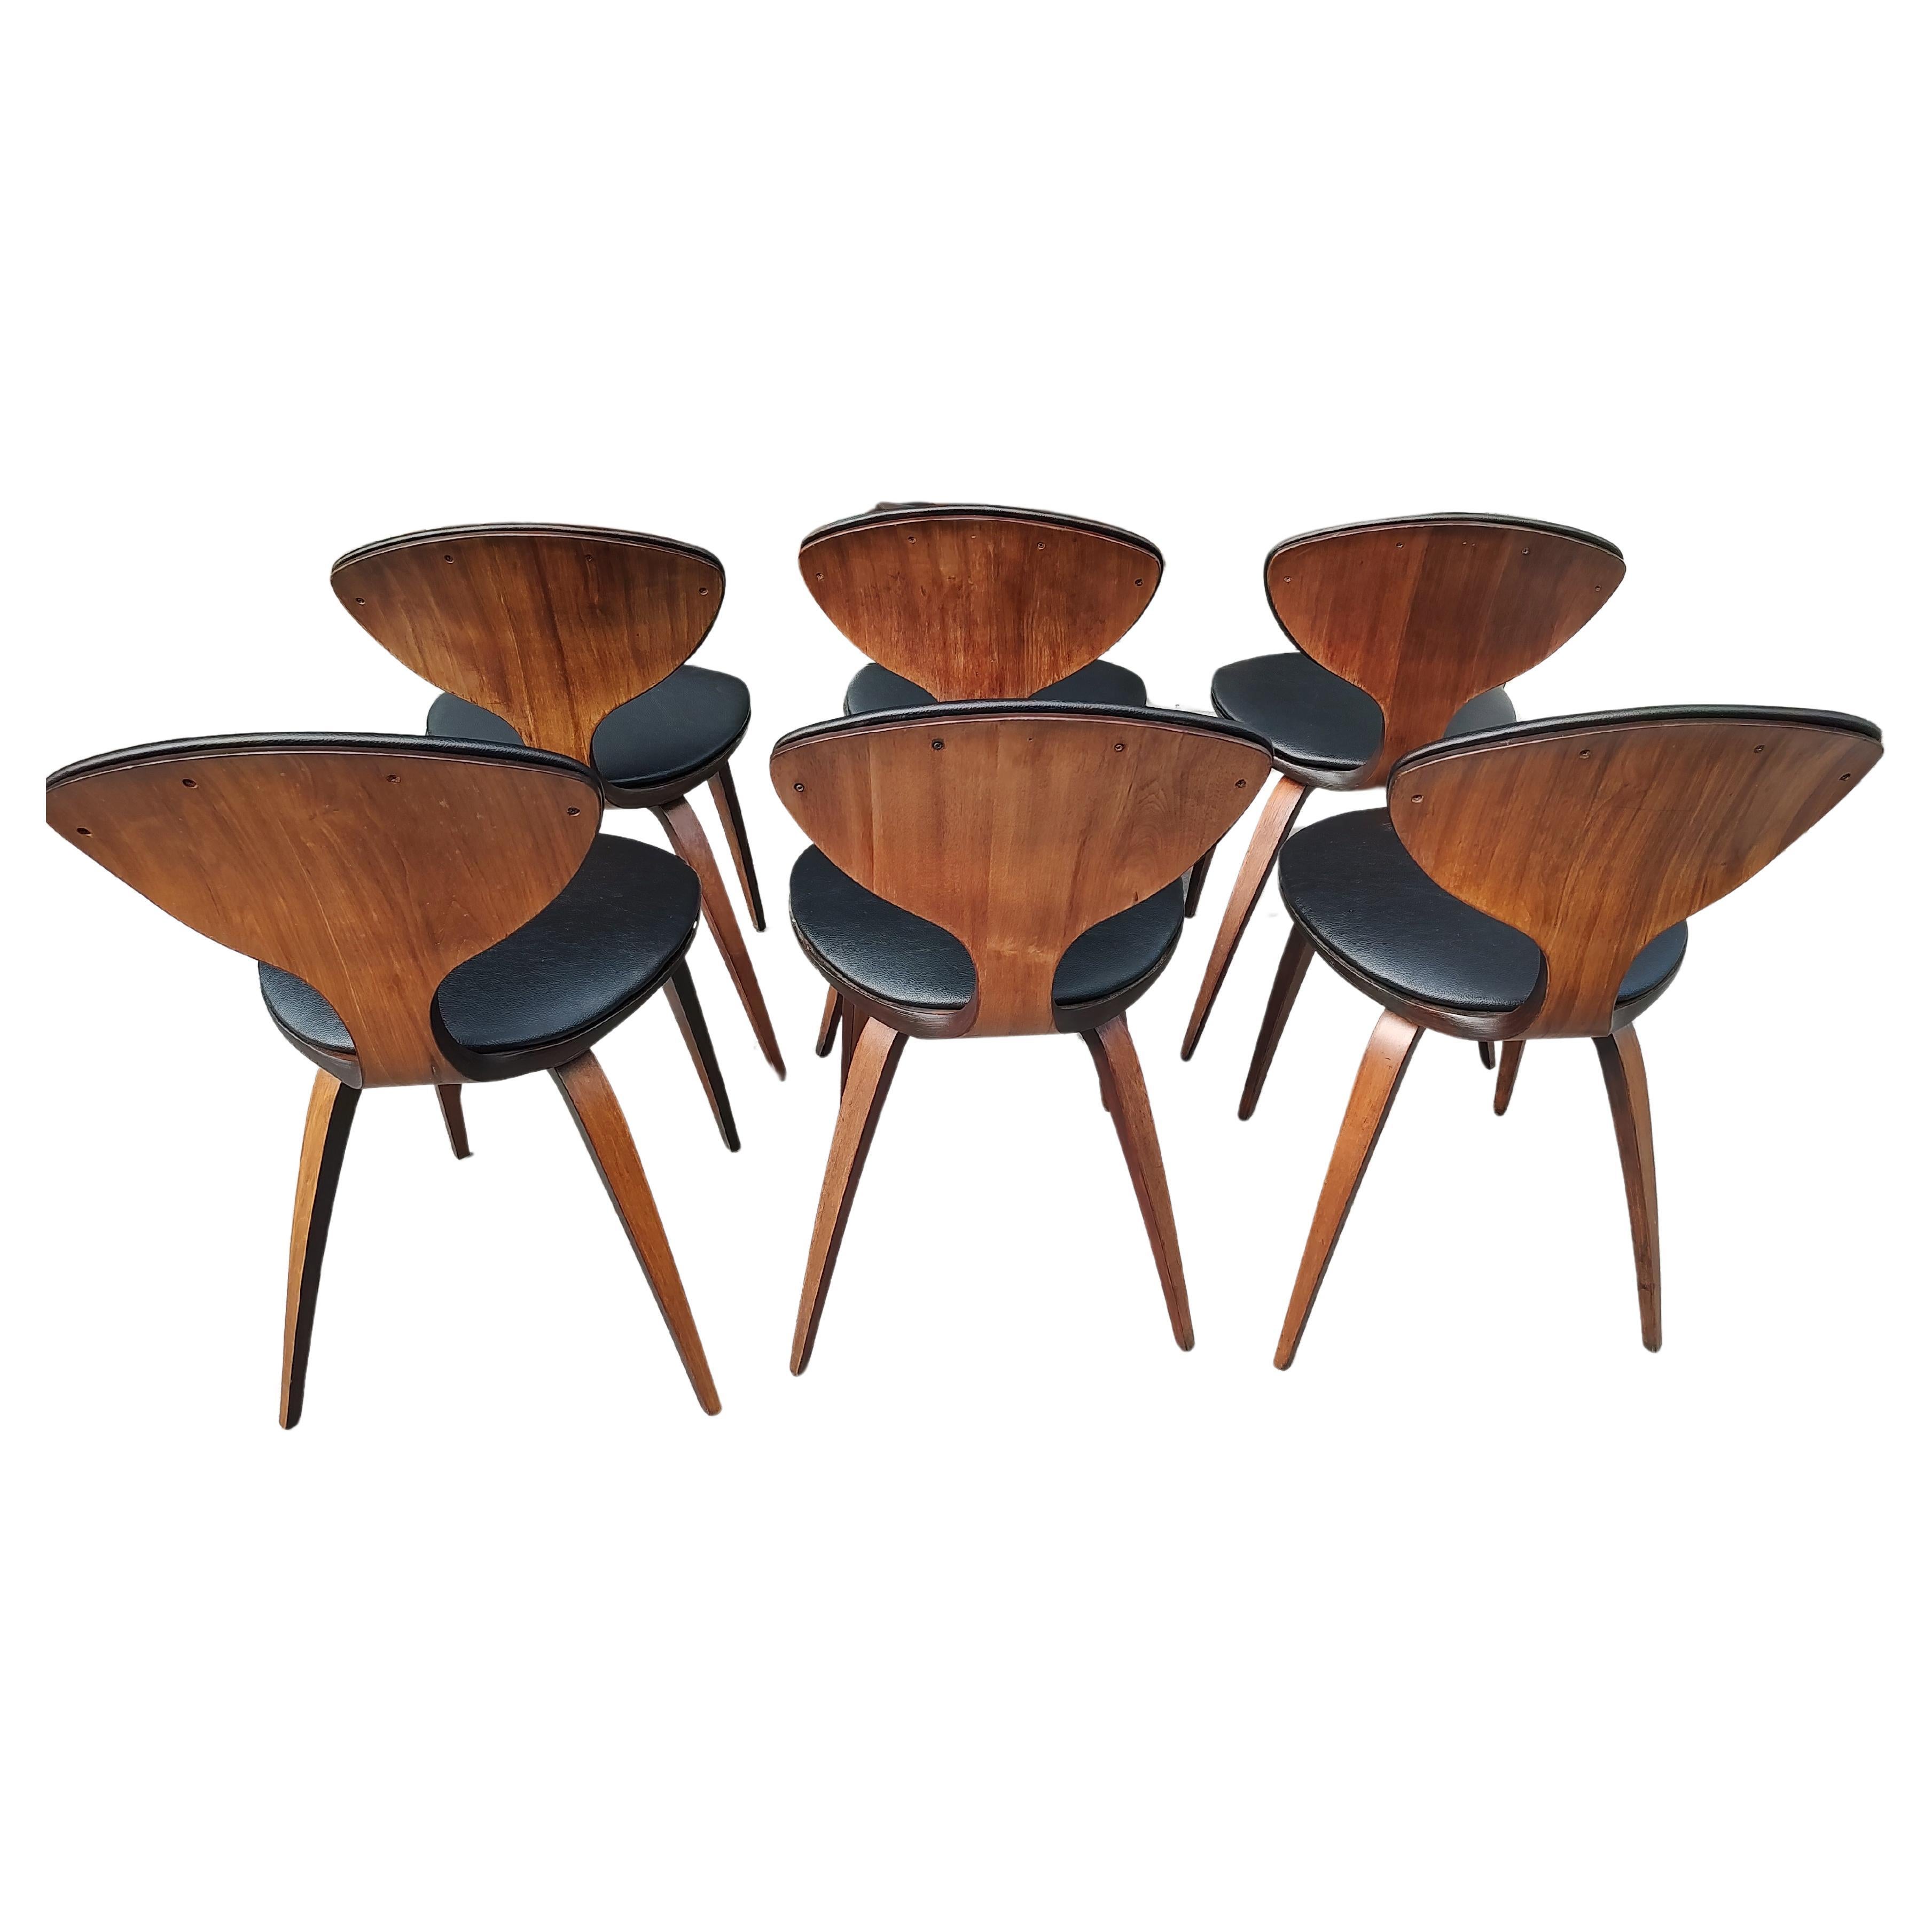 Mid-20th Century Mid Century Modern Set of 6 Original Norman Cherner Dining Chairs for Plycraft  For Sale